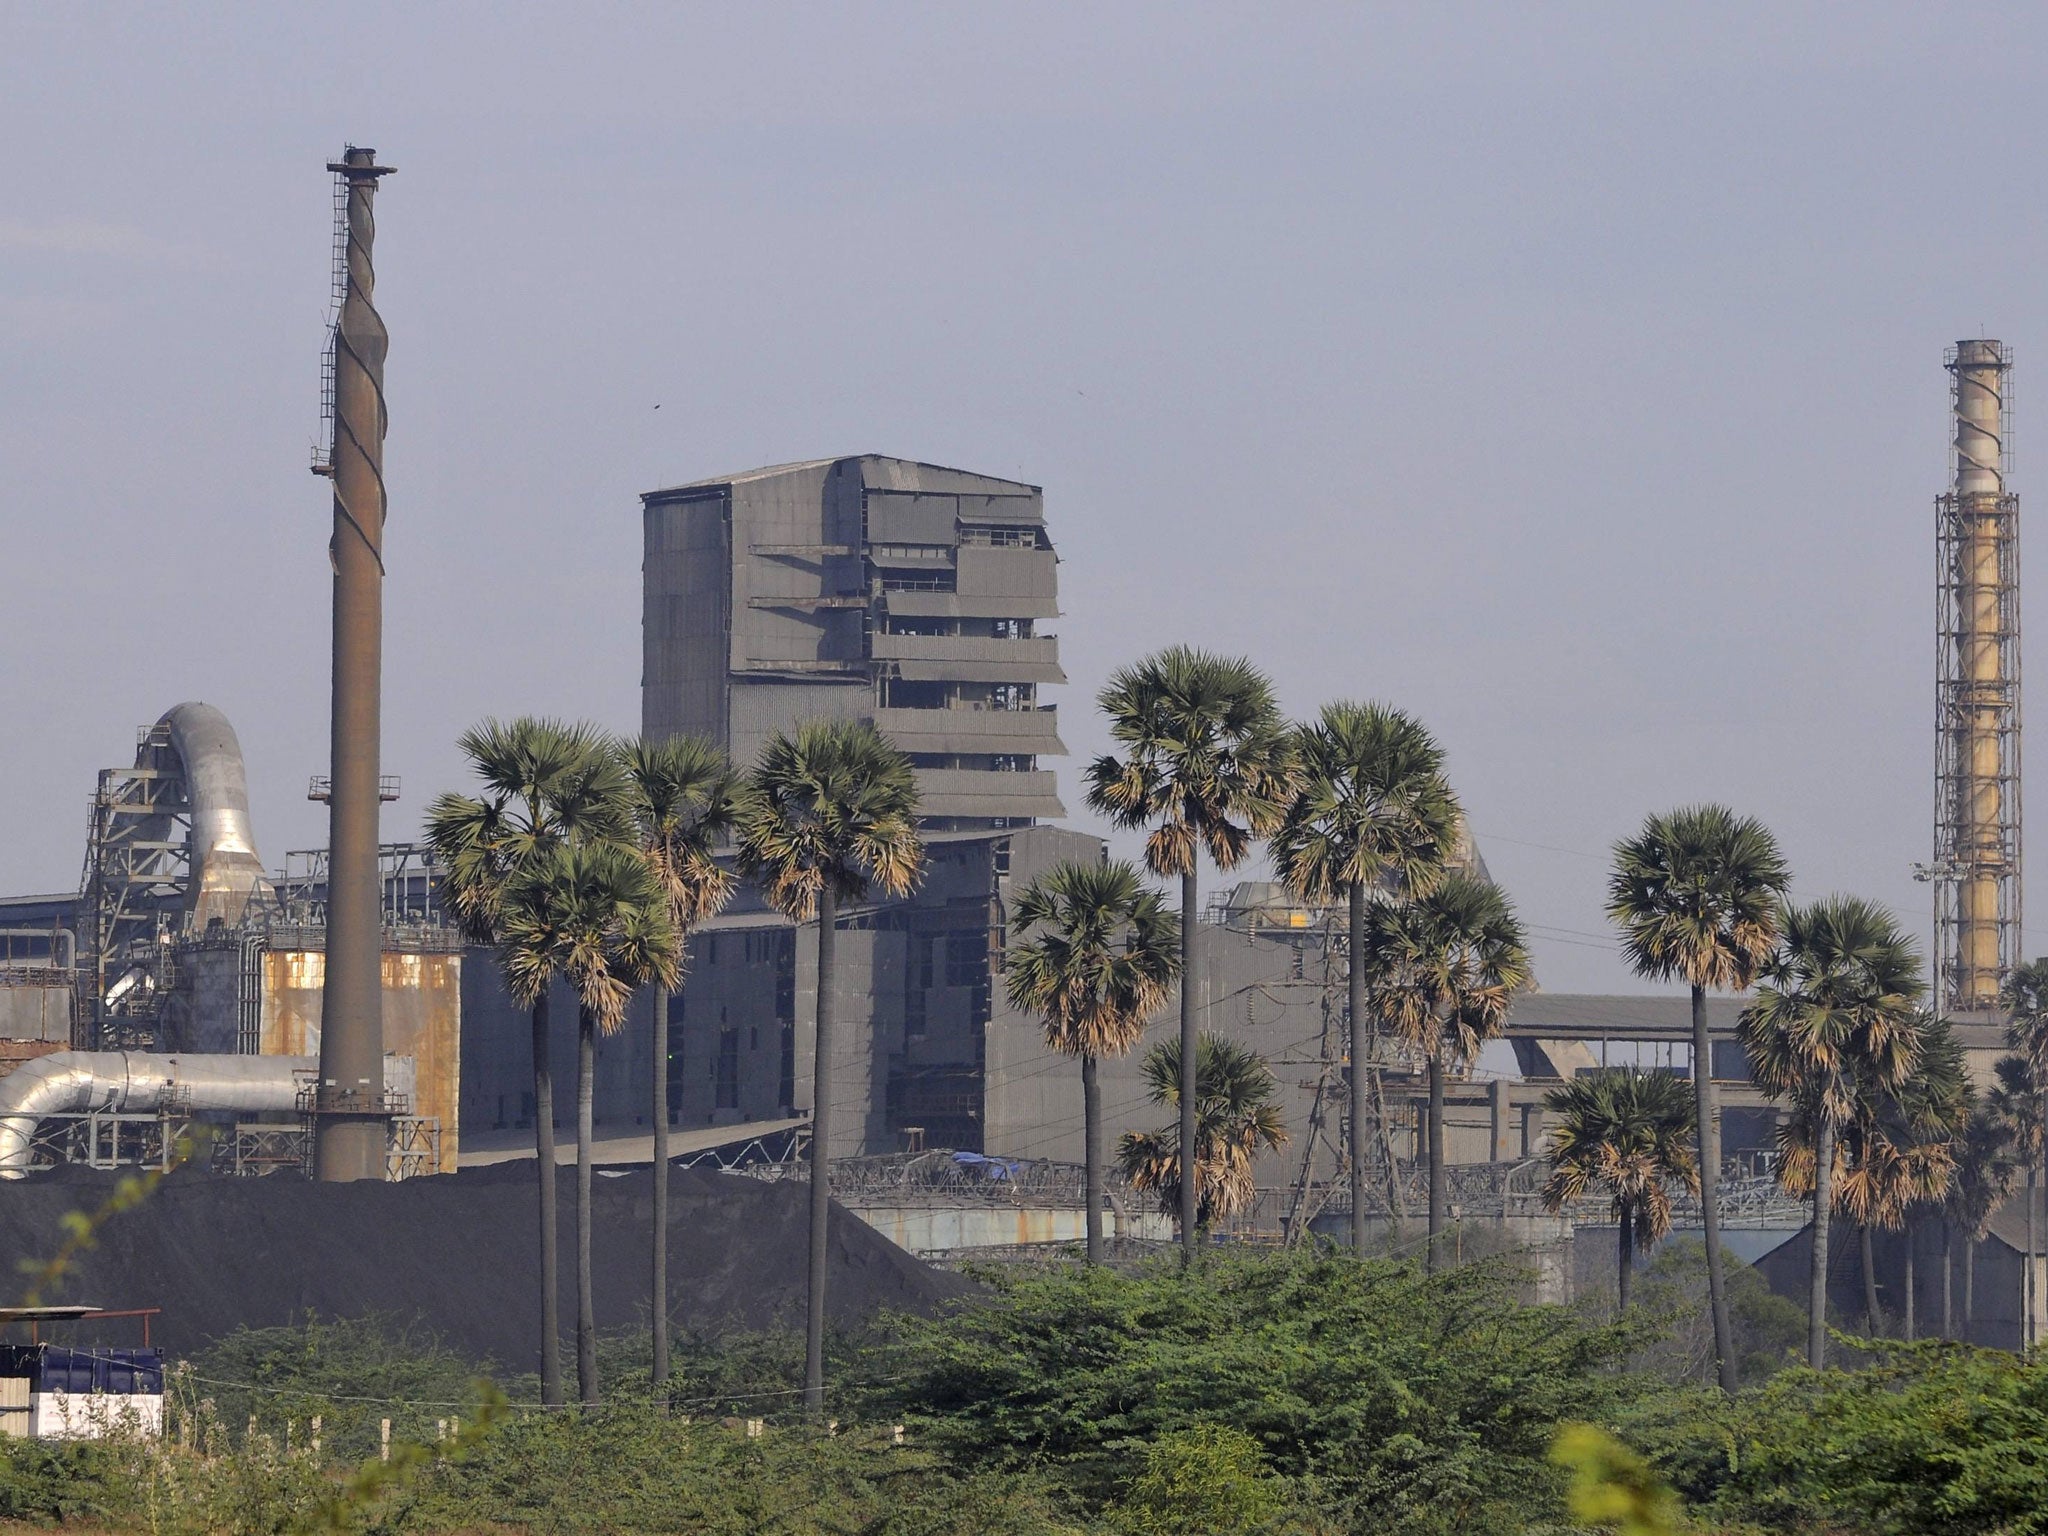 A Vedanta Resources-owned copper plant in Tuticorin, India. The company were hoping to mine for bauxite in a £1.1bn project elsewhere in India but have been dealt a blow by the supreme court